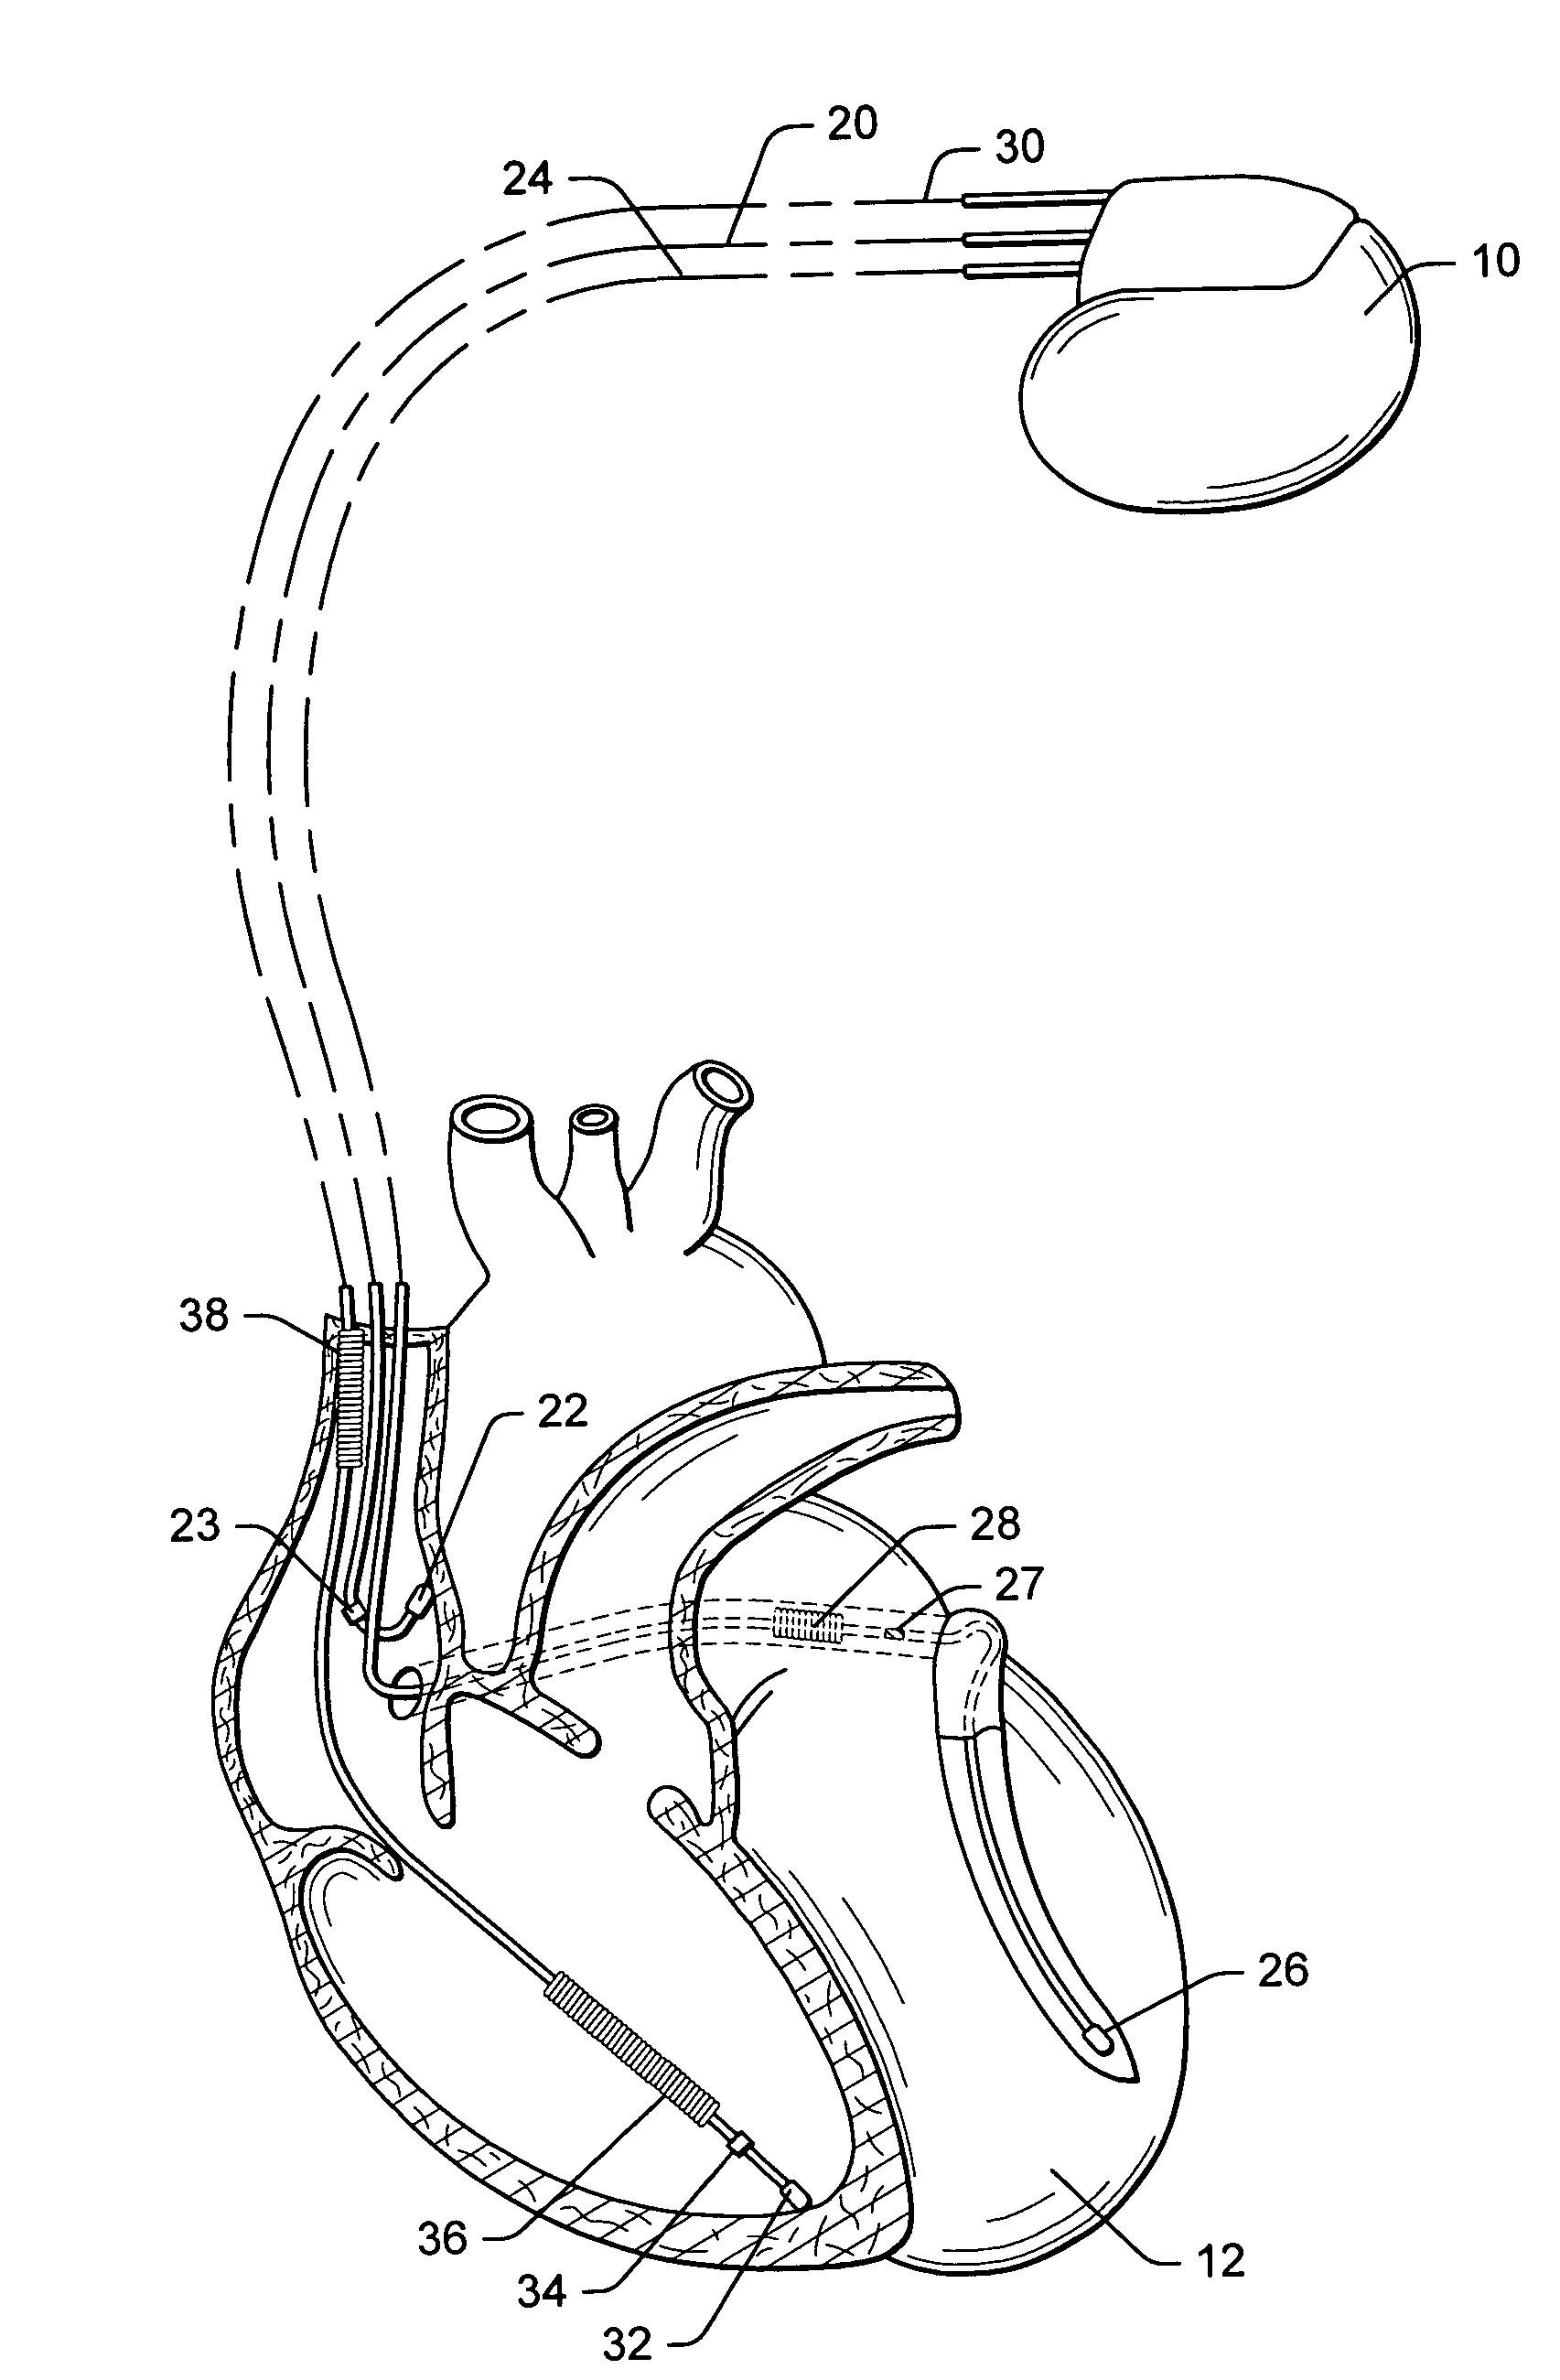 System and method for rapid optimization of control parameters of an implantable cardiac stimulation device